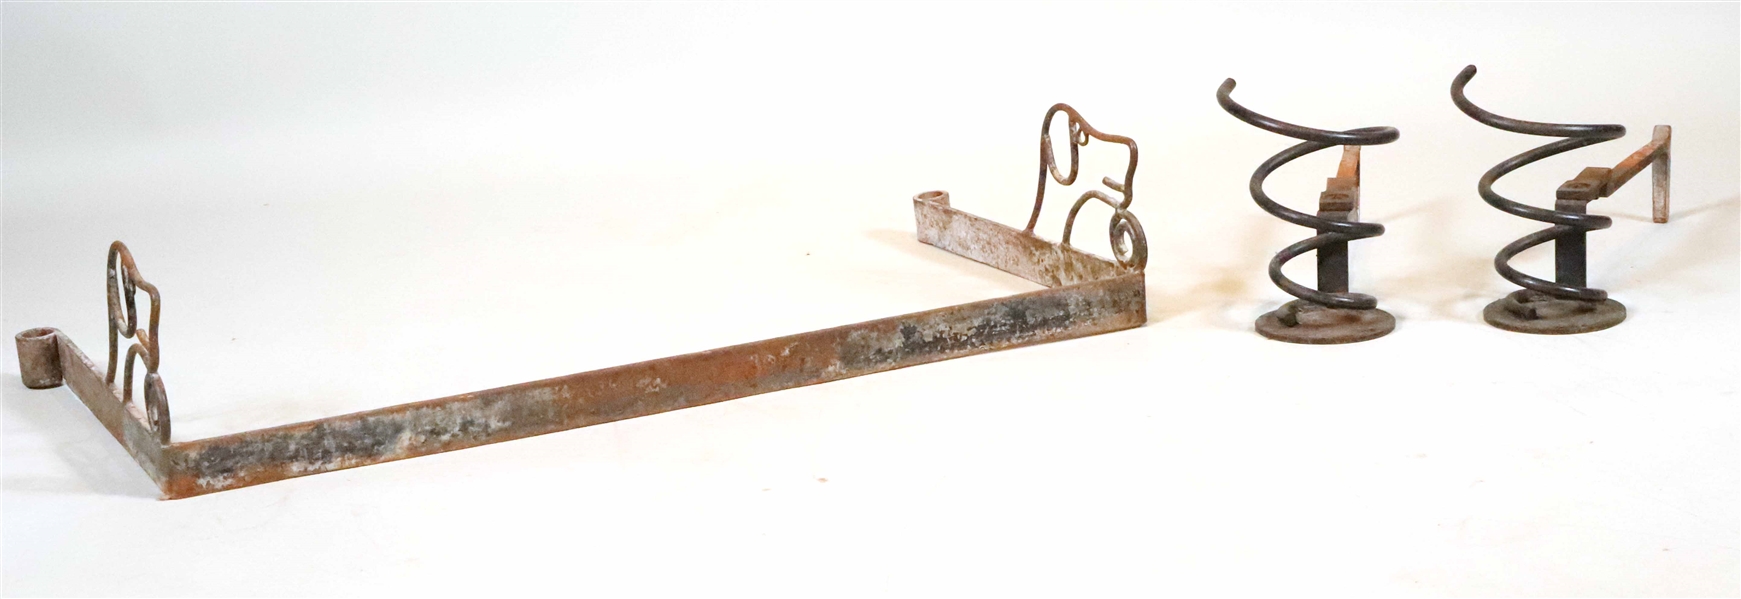 Pair of Wrought-Iron Spring-Form Andirons